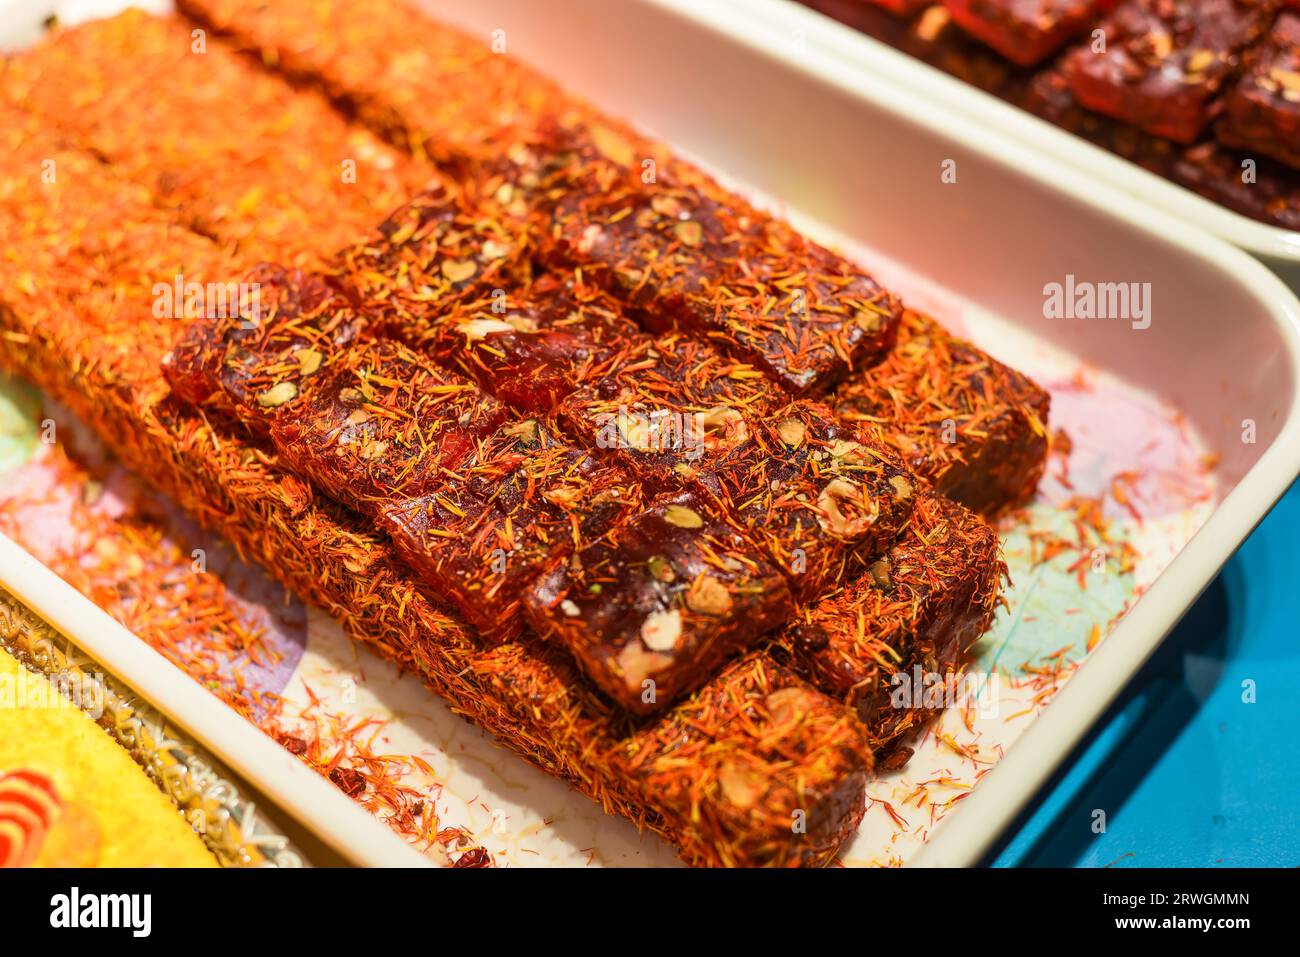 Turkish Delights and sweets made of honey and nuts Stock Photo